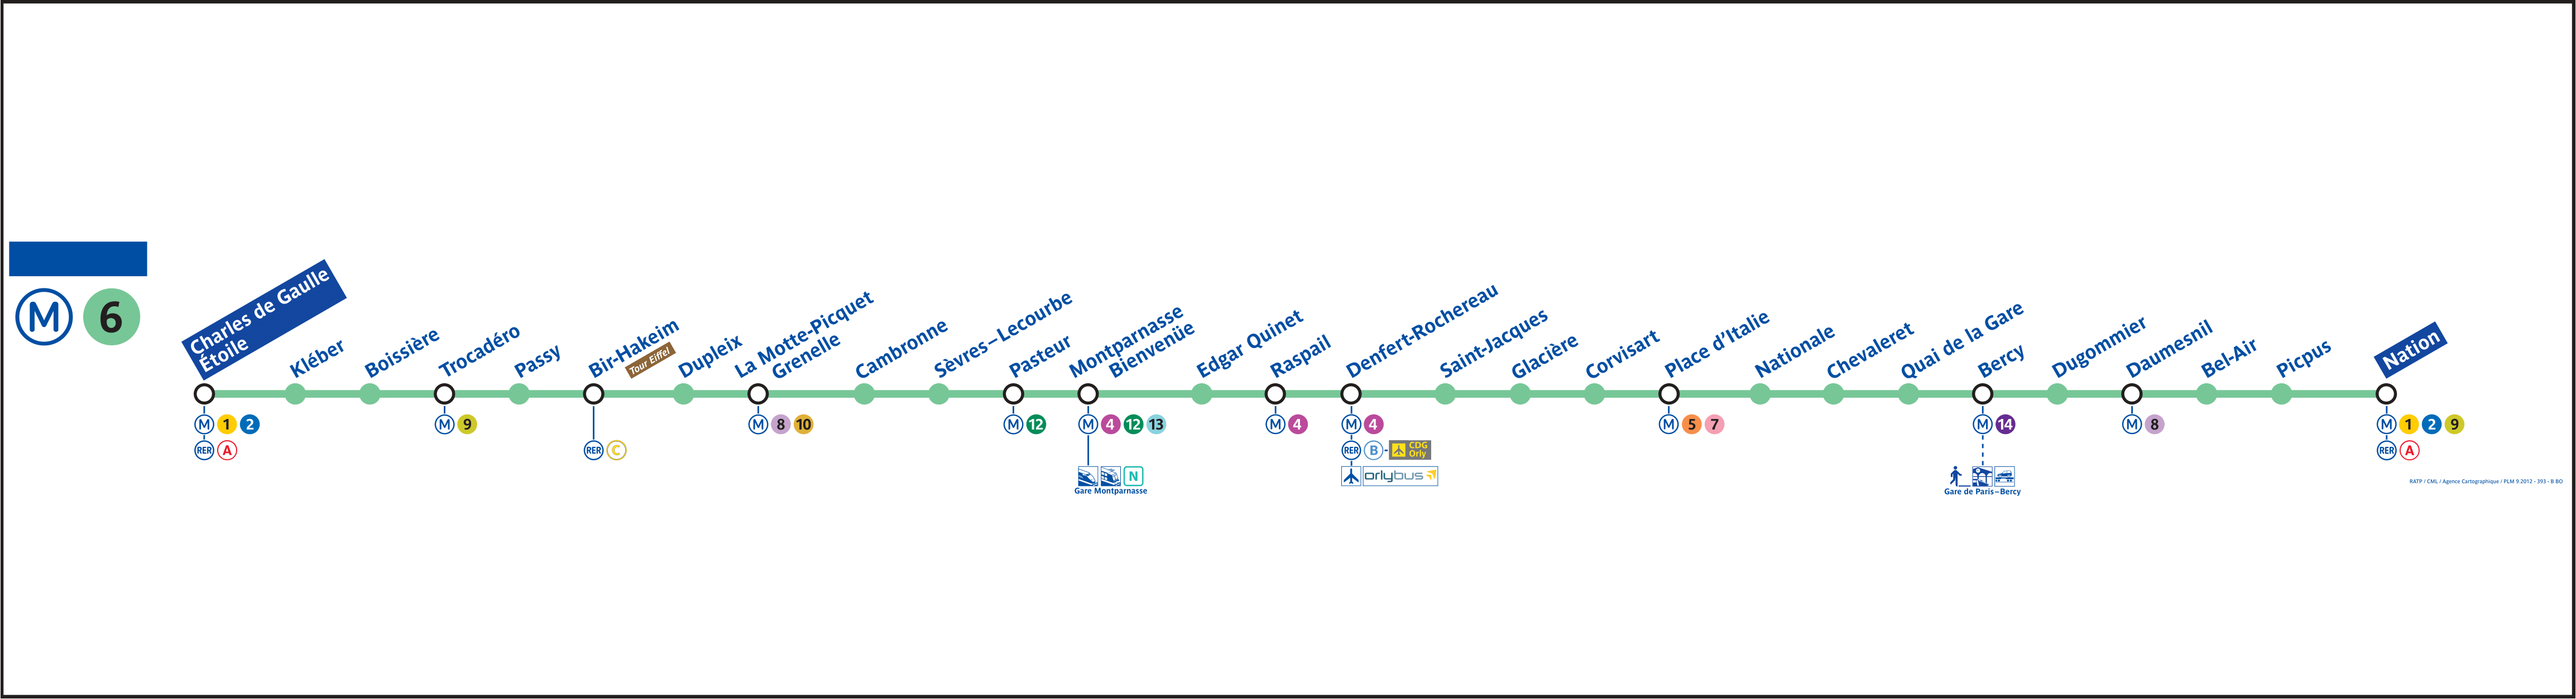 Timetable first and last metro line 6 Paris - Night Fox Tips